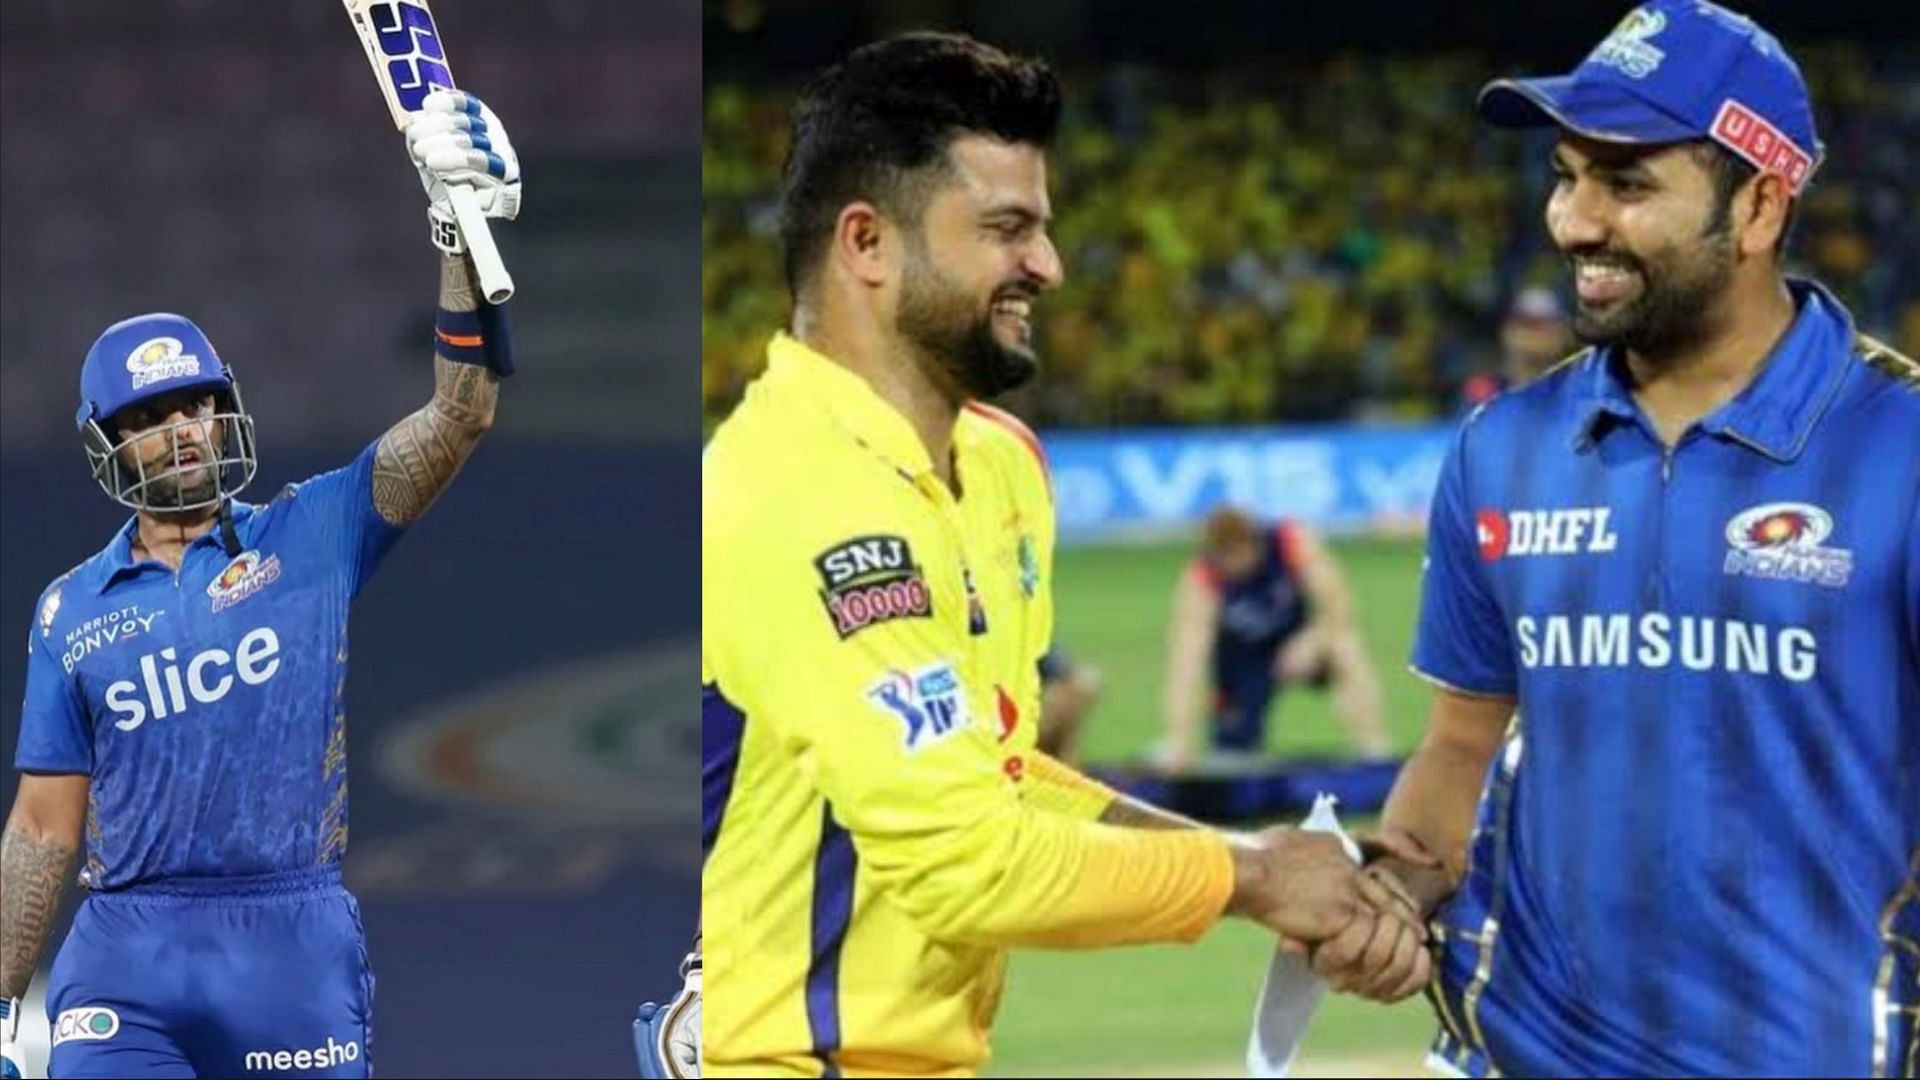 Could Mumbai Indians spring a surprise by signing Suresh Raina as a replacement for Suryakumar Yadav? (Image Source: Instagram)